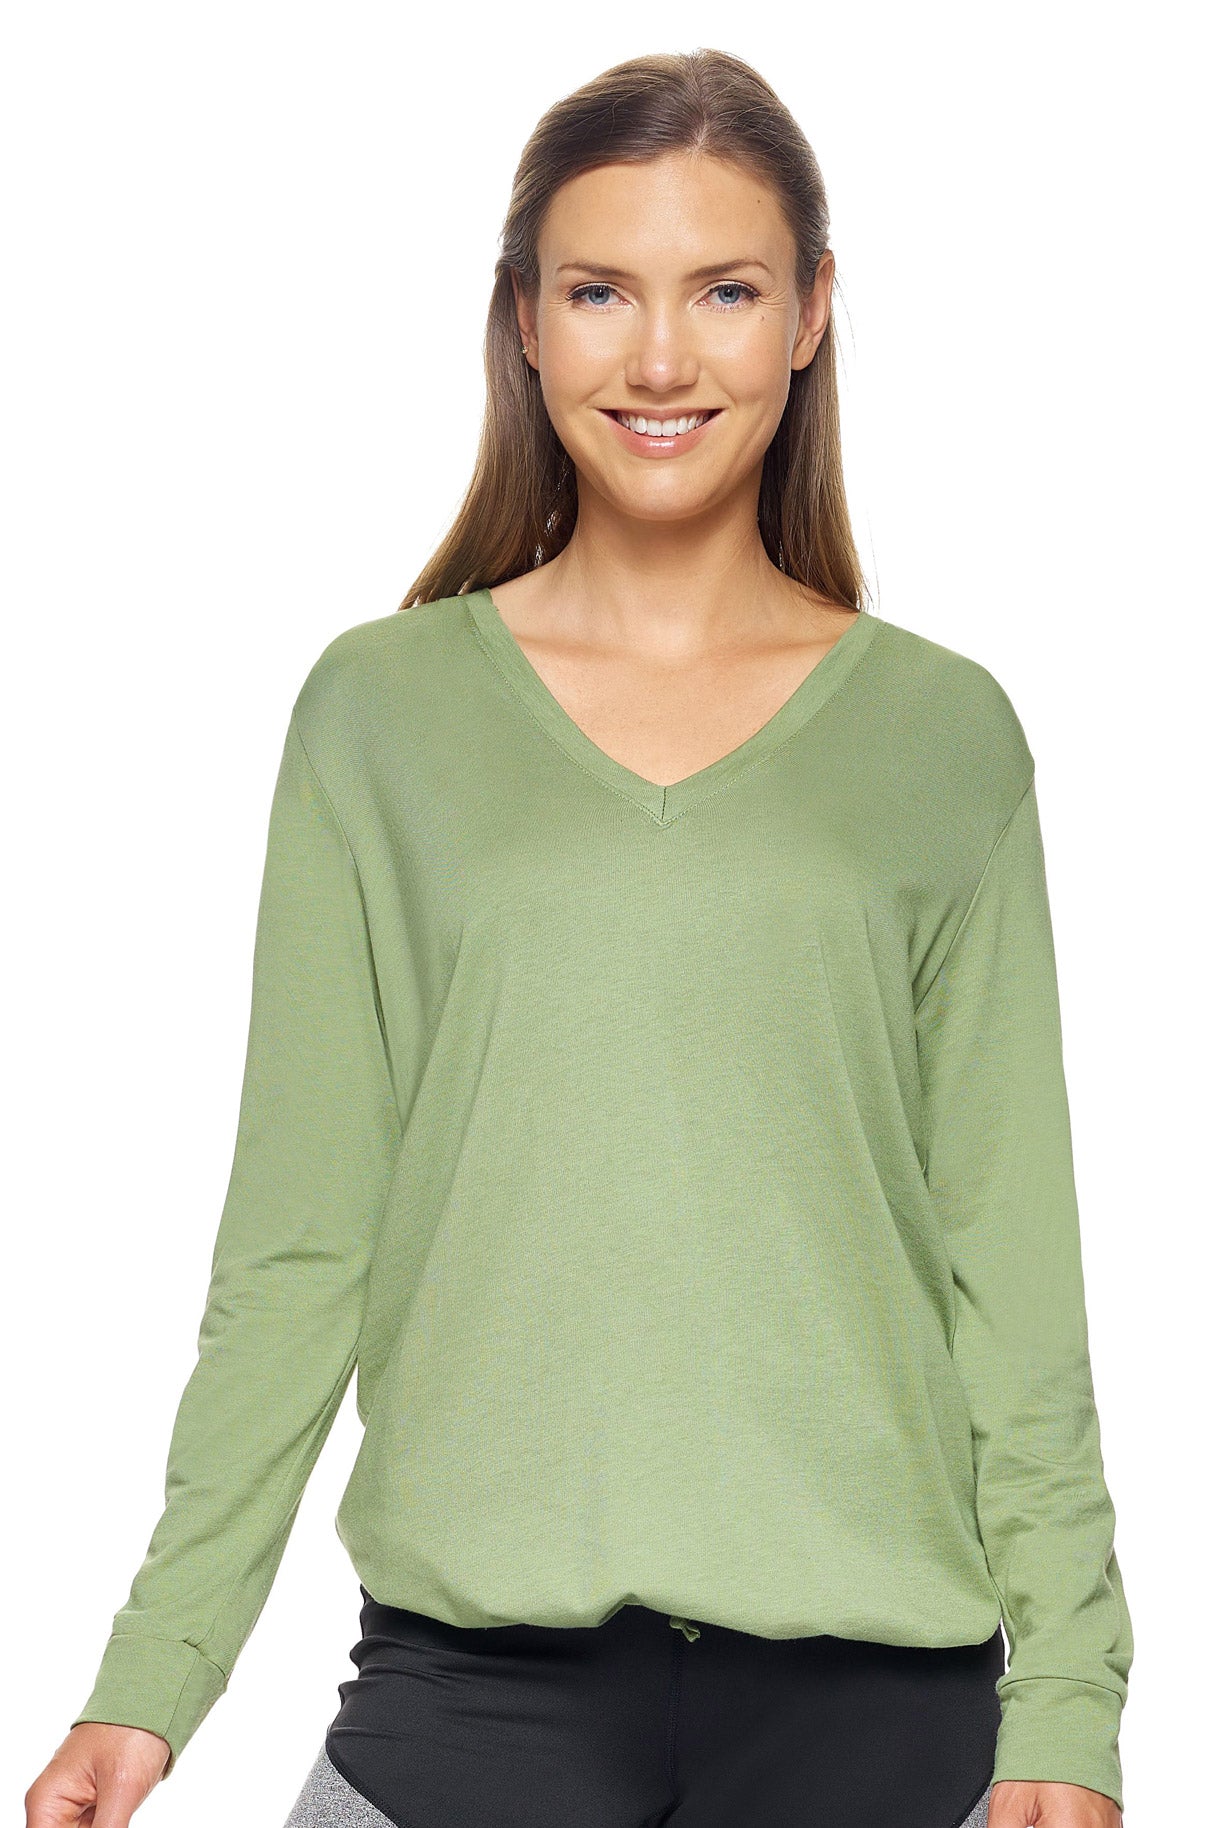 Expert Brand Wholesale Women's Hoodie Shirt V-Neck Lenzing Modal Made in USA in Meadow Green#meadow